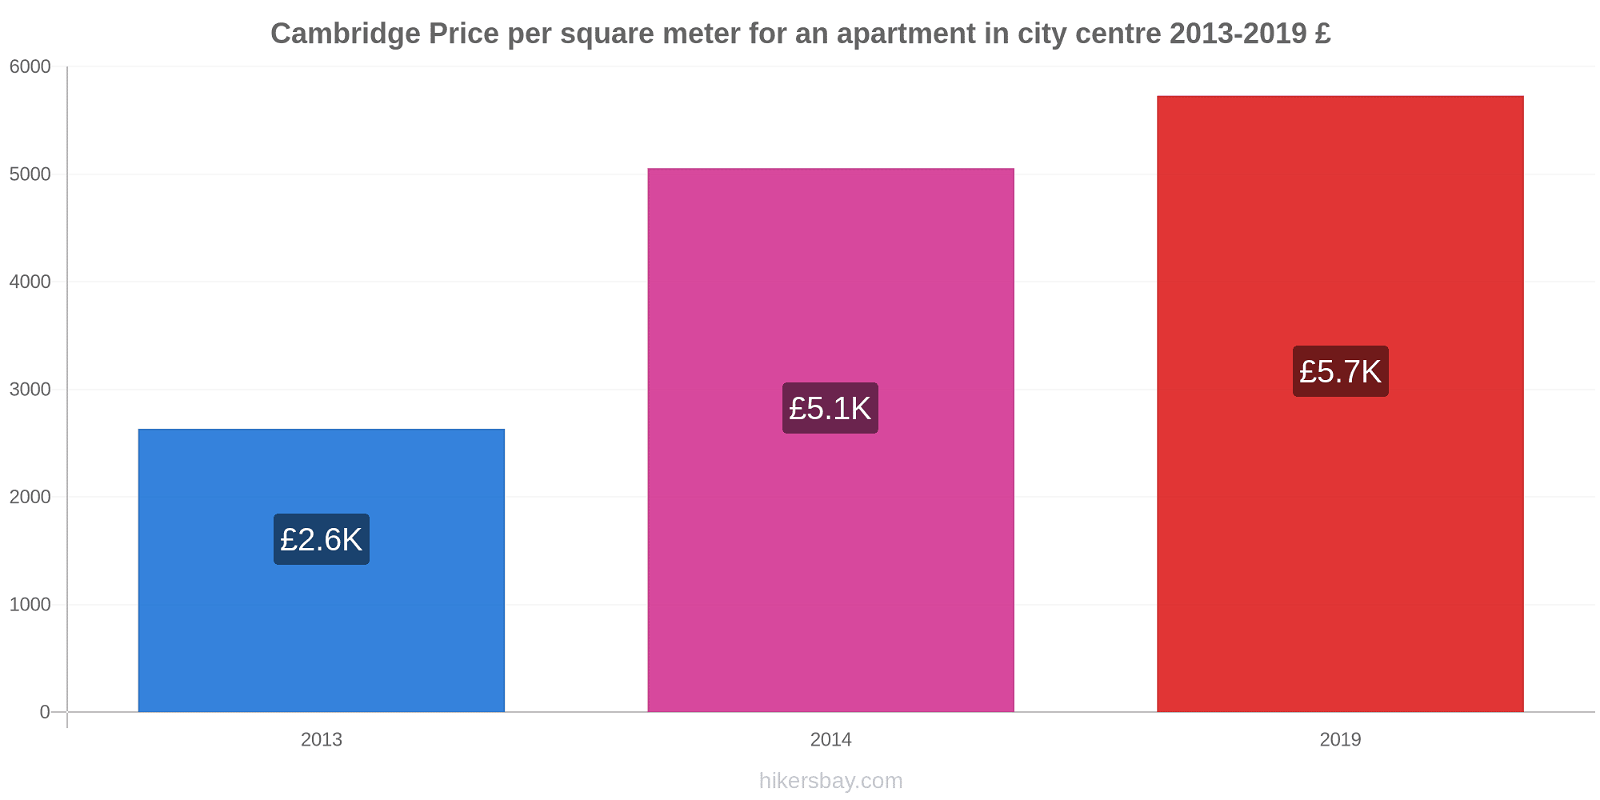 Cambridge price changes Price per square meter for an apartment in city centre hikersbay.com